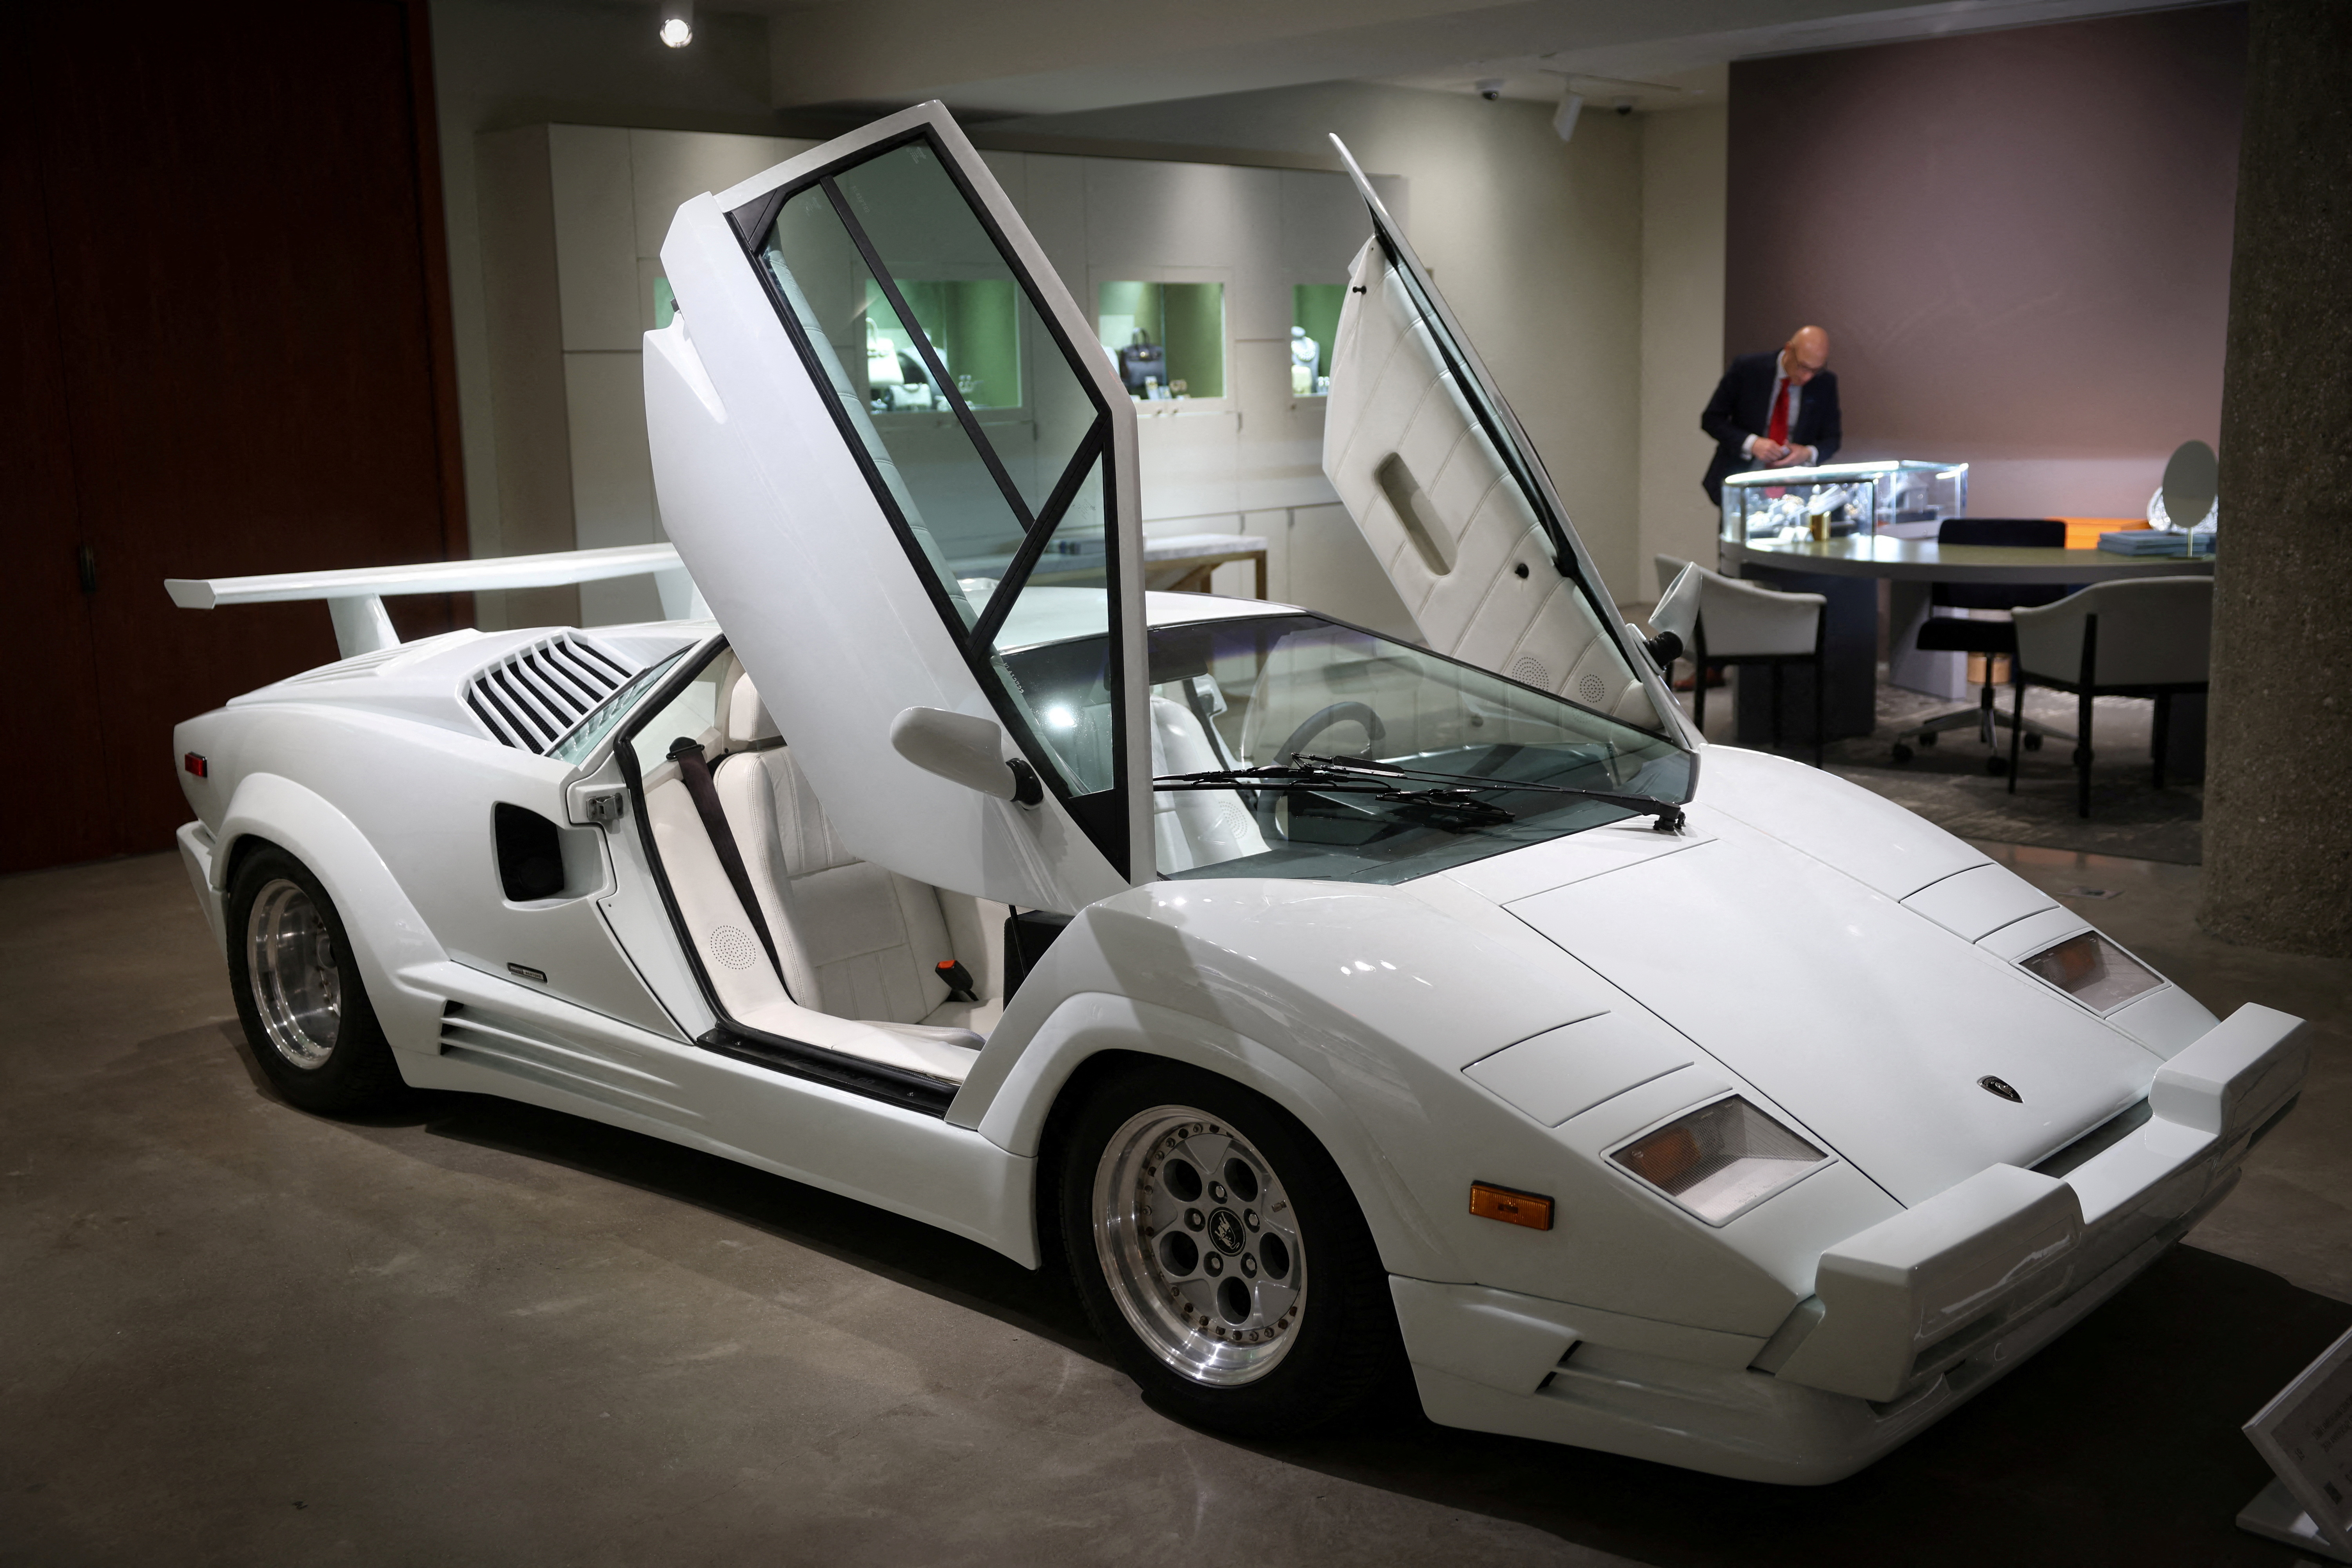 1989 Lamborghini Countach 25th Anniversary Edition car from the film "The Wolf of Wall Street" ahead of auction in New York